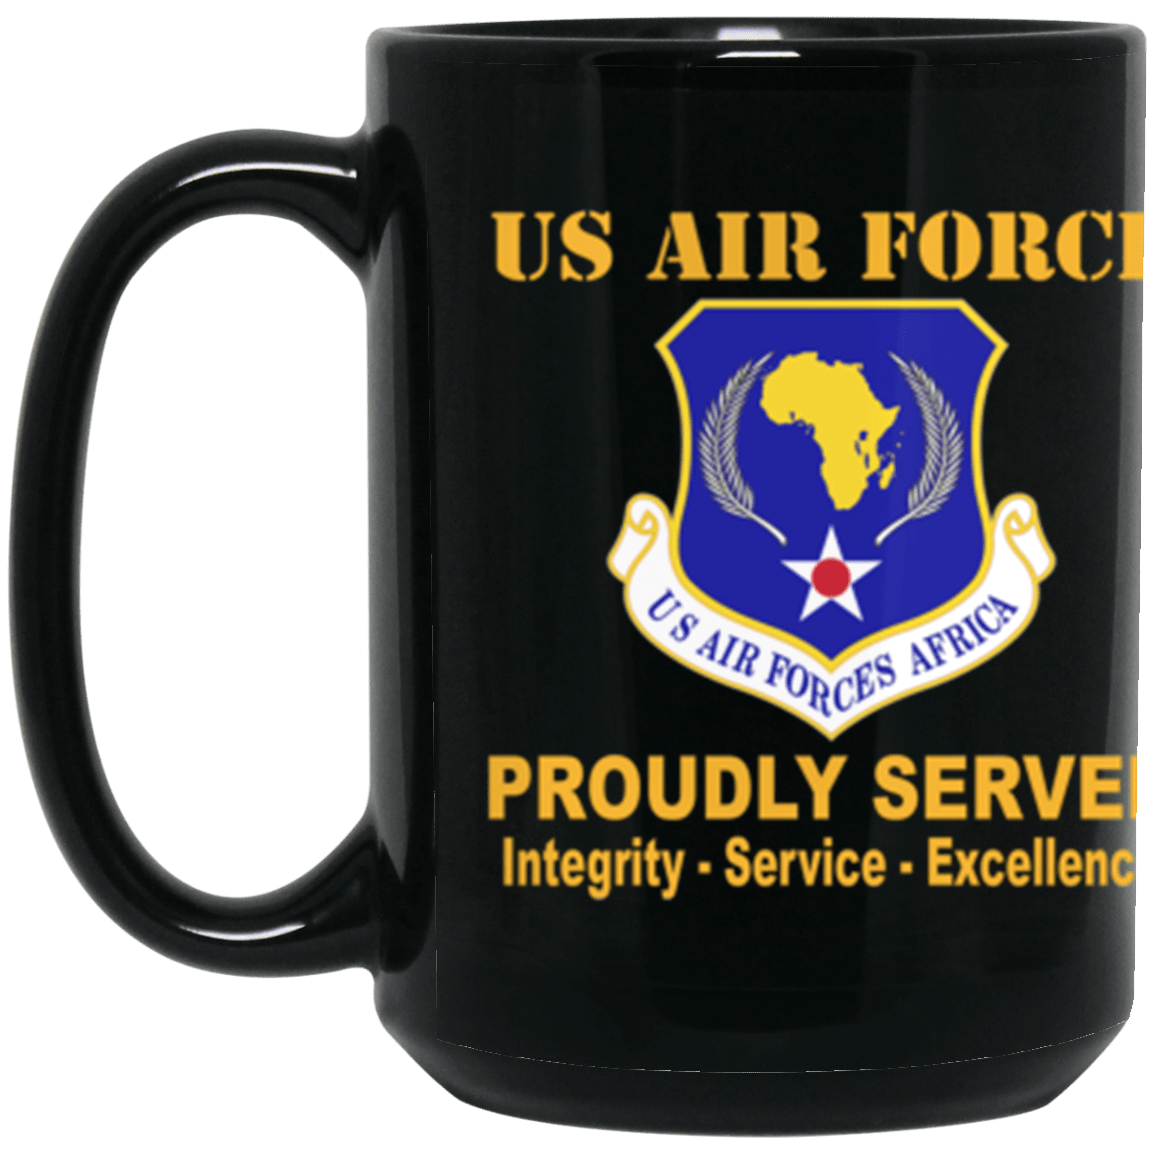 US Air Force Pacific Air Forces Proudly Served Core Values 15 oz. Black Mug-Mug-USAF-Veterans Nation